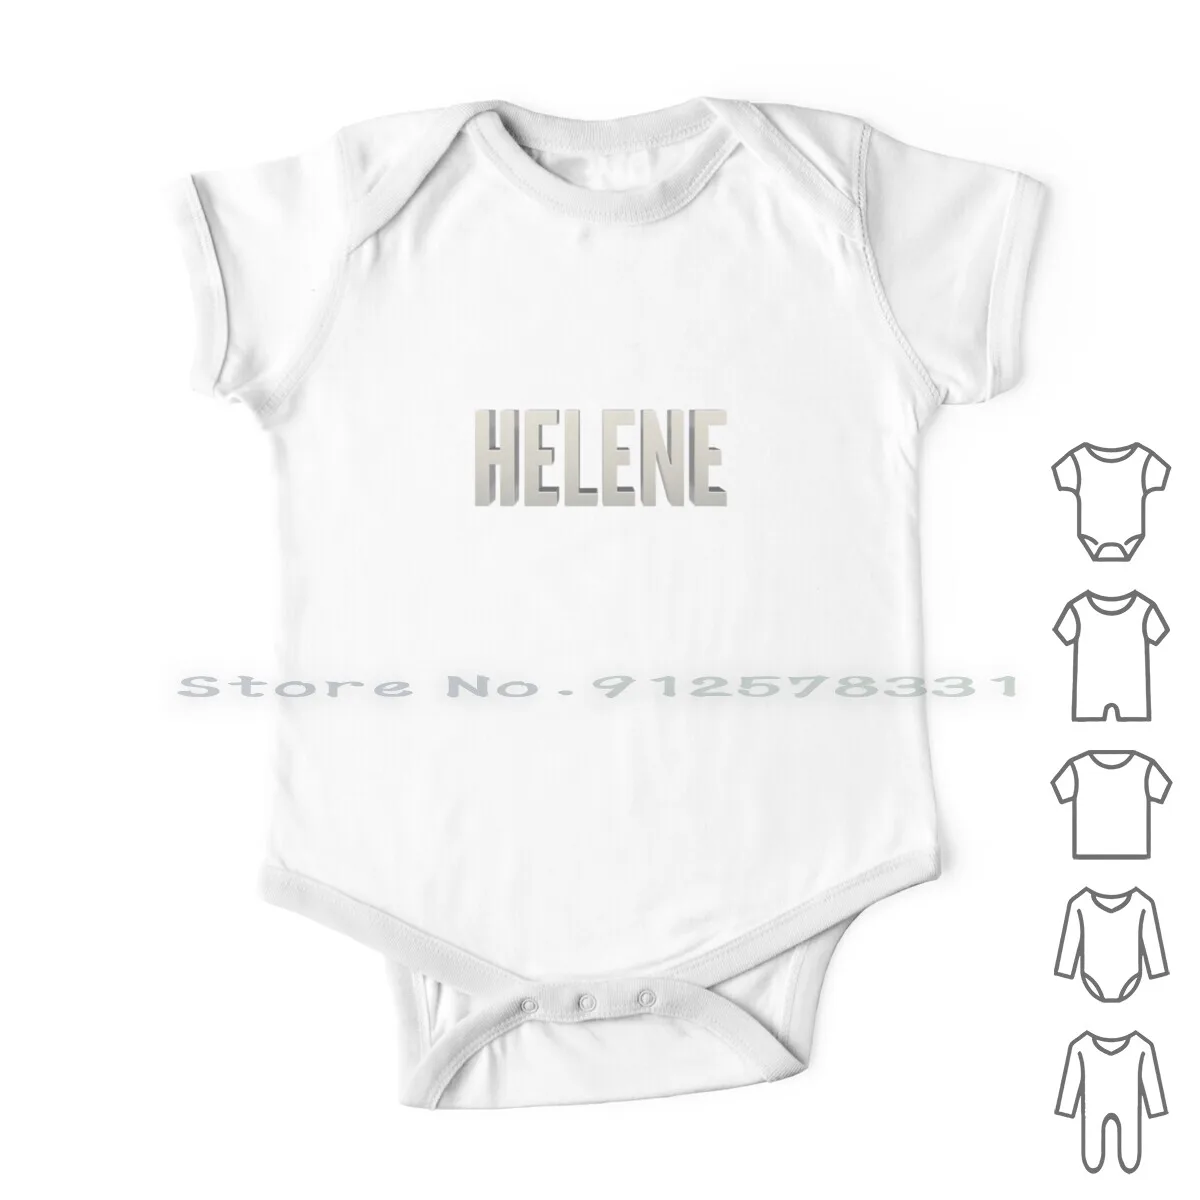 

First Name Helene Newborn Baby Clothes Rompers Cotton Jumpsuits Helene Girls Boy Girl Names For Babies Popular Childrens Names